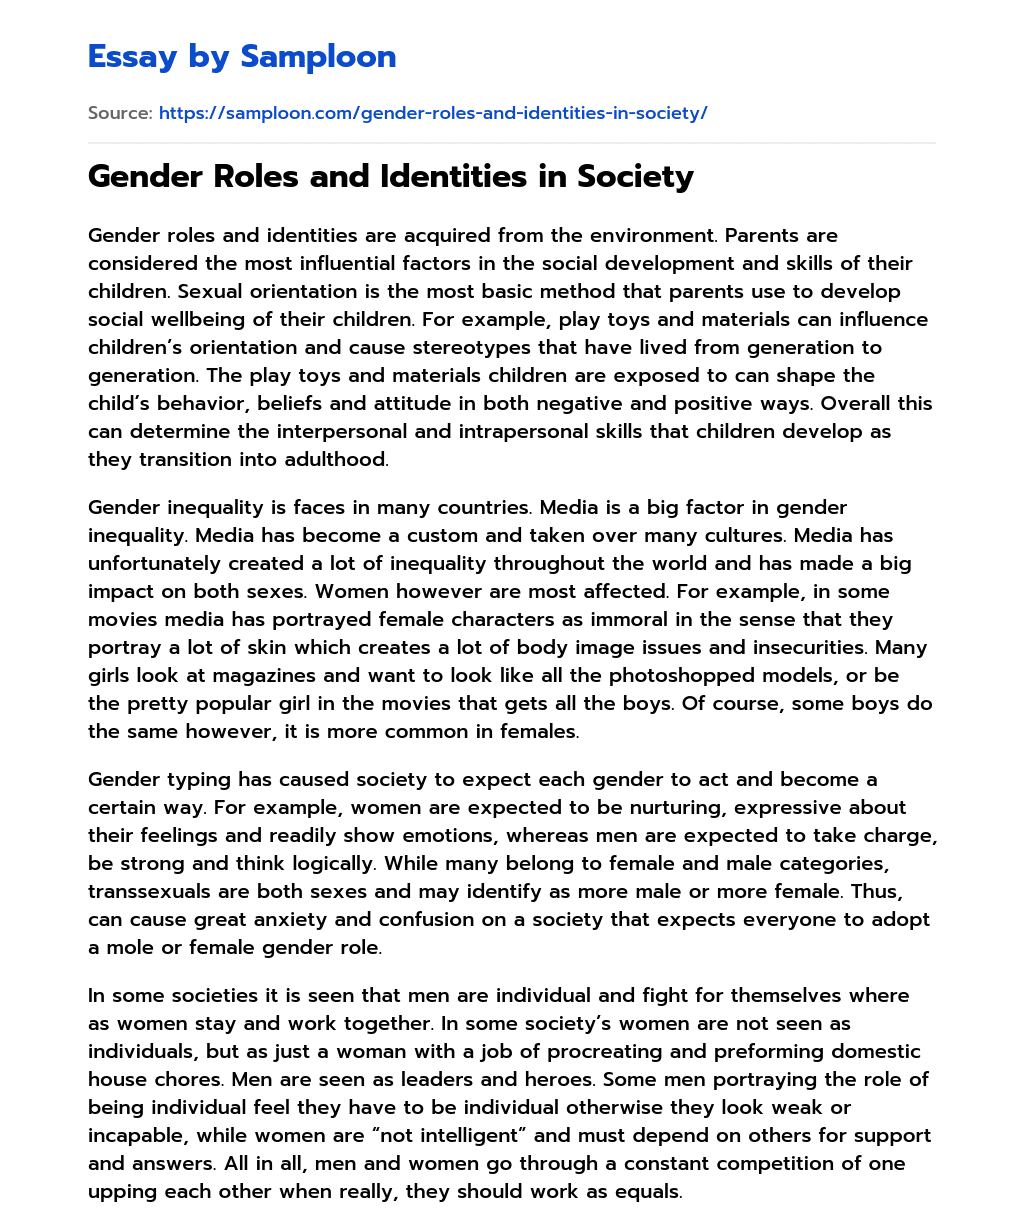 changing gender roles in society essay